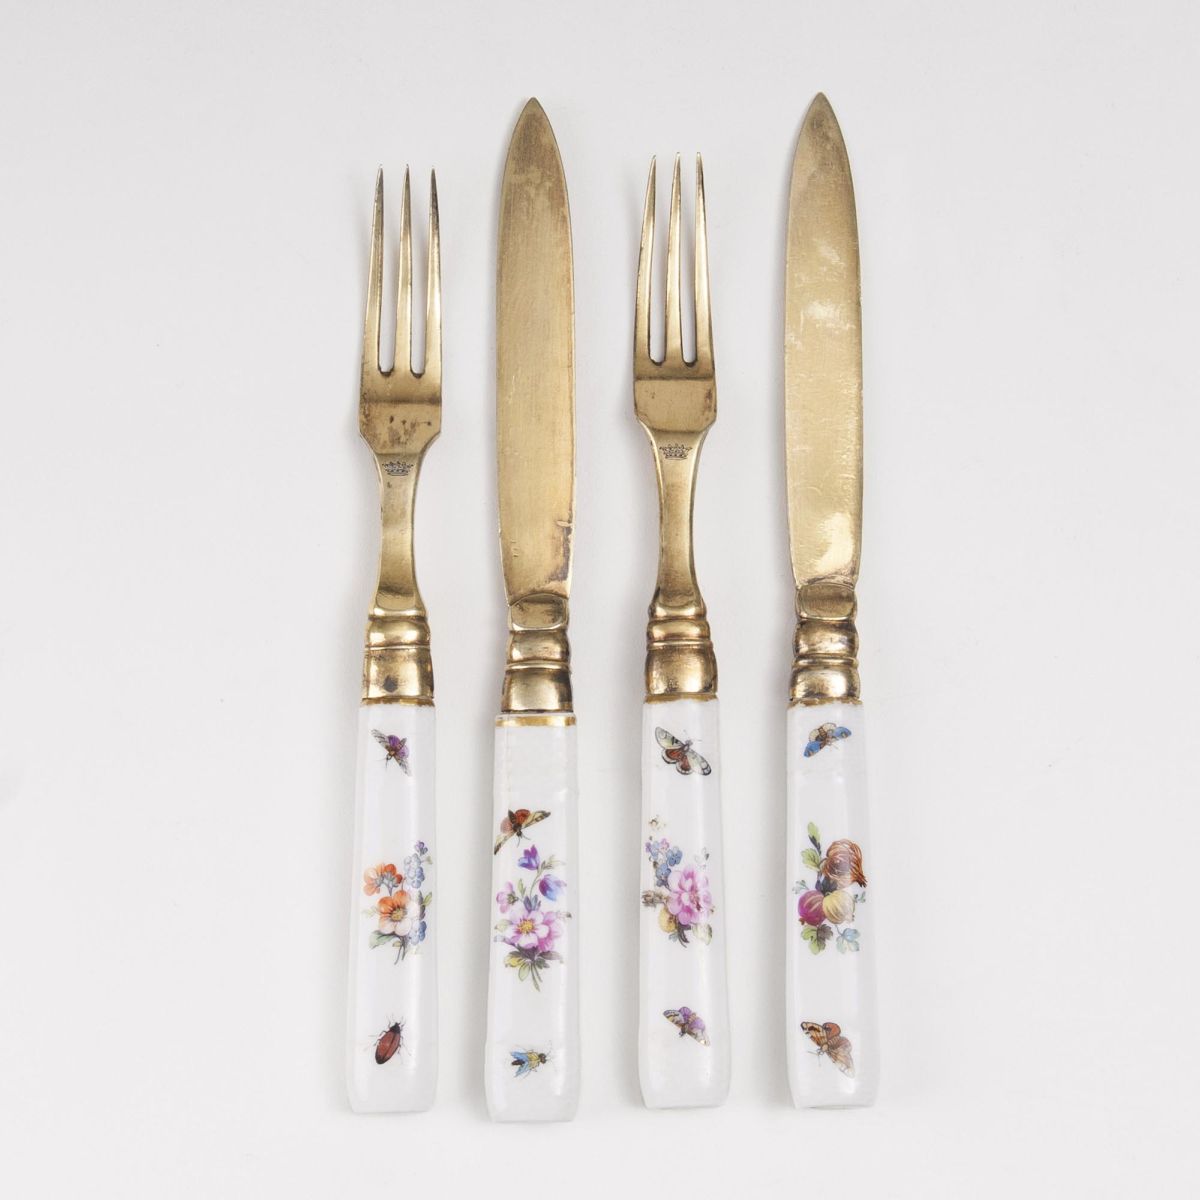 A Pair of Cutlery Parts For Fruits